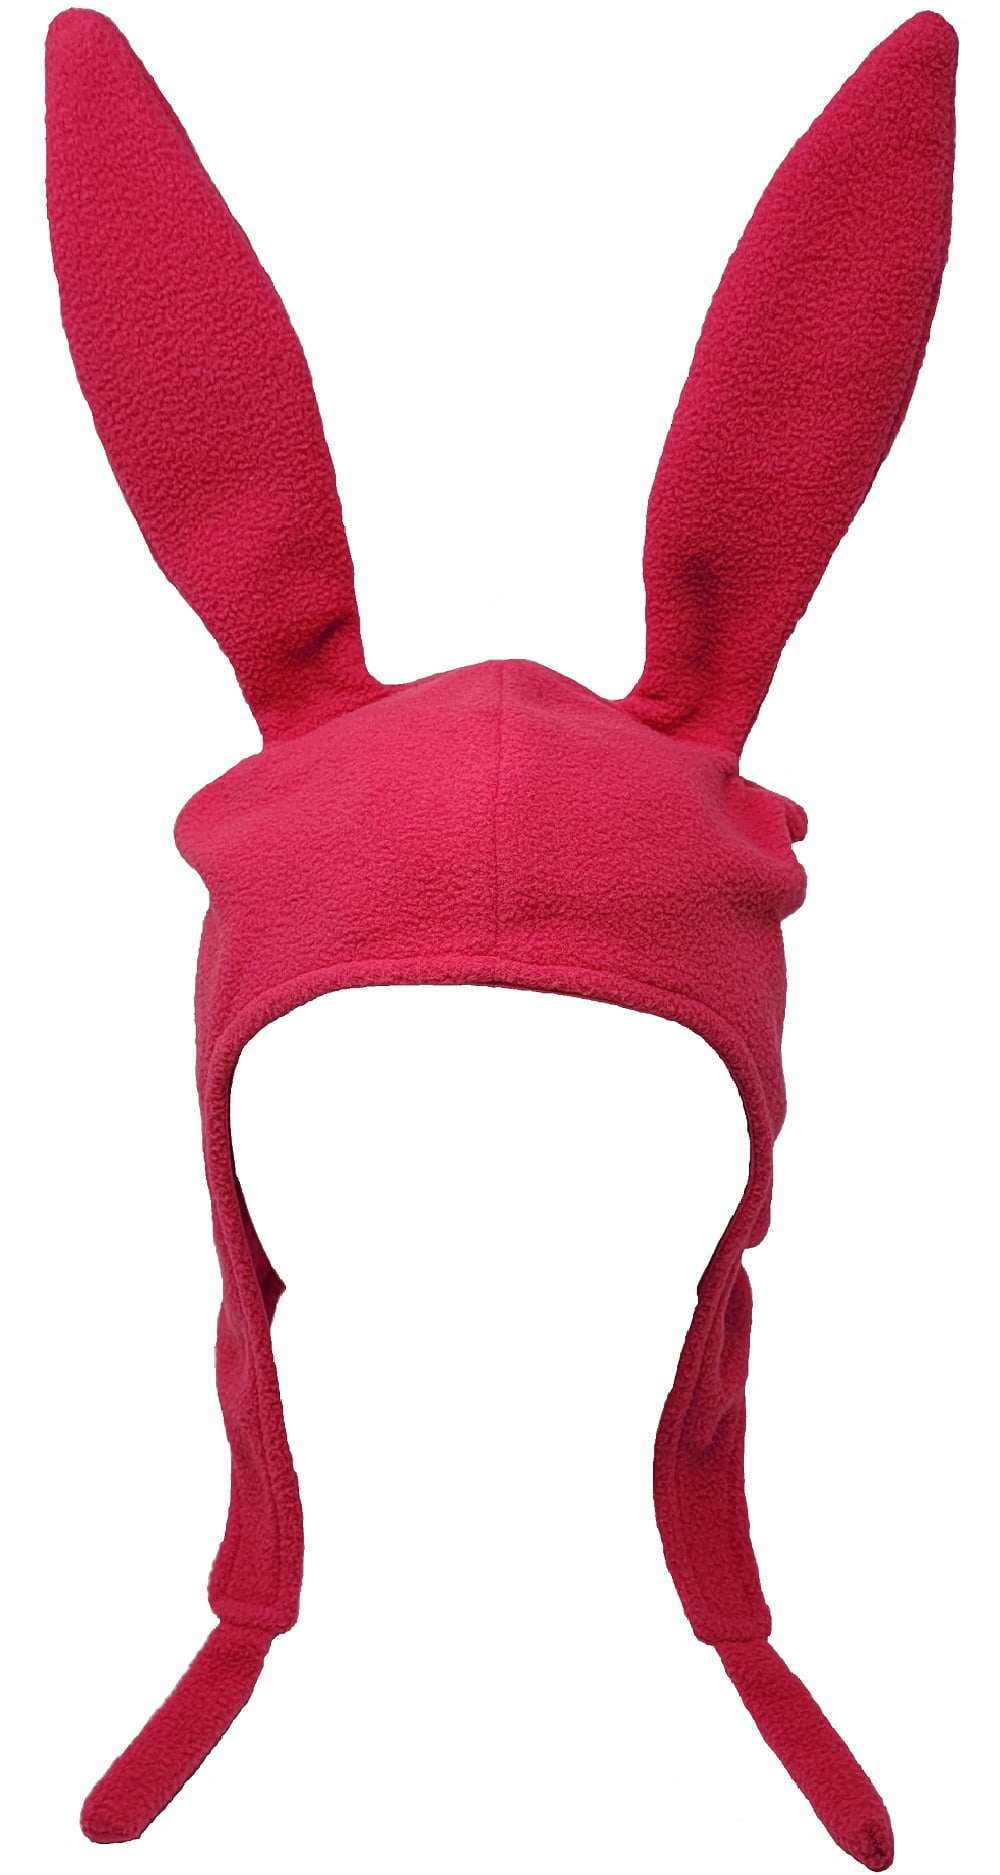 Let's start with Louise's pink, bunny-eared hat a.k.a. the Best